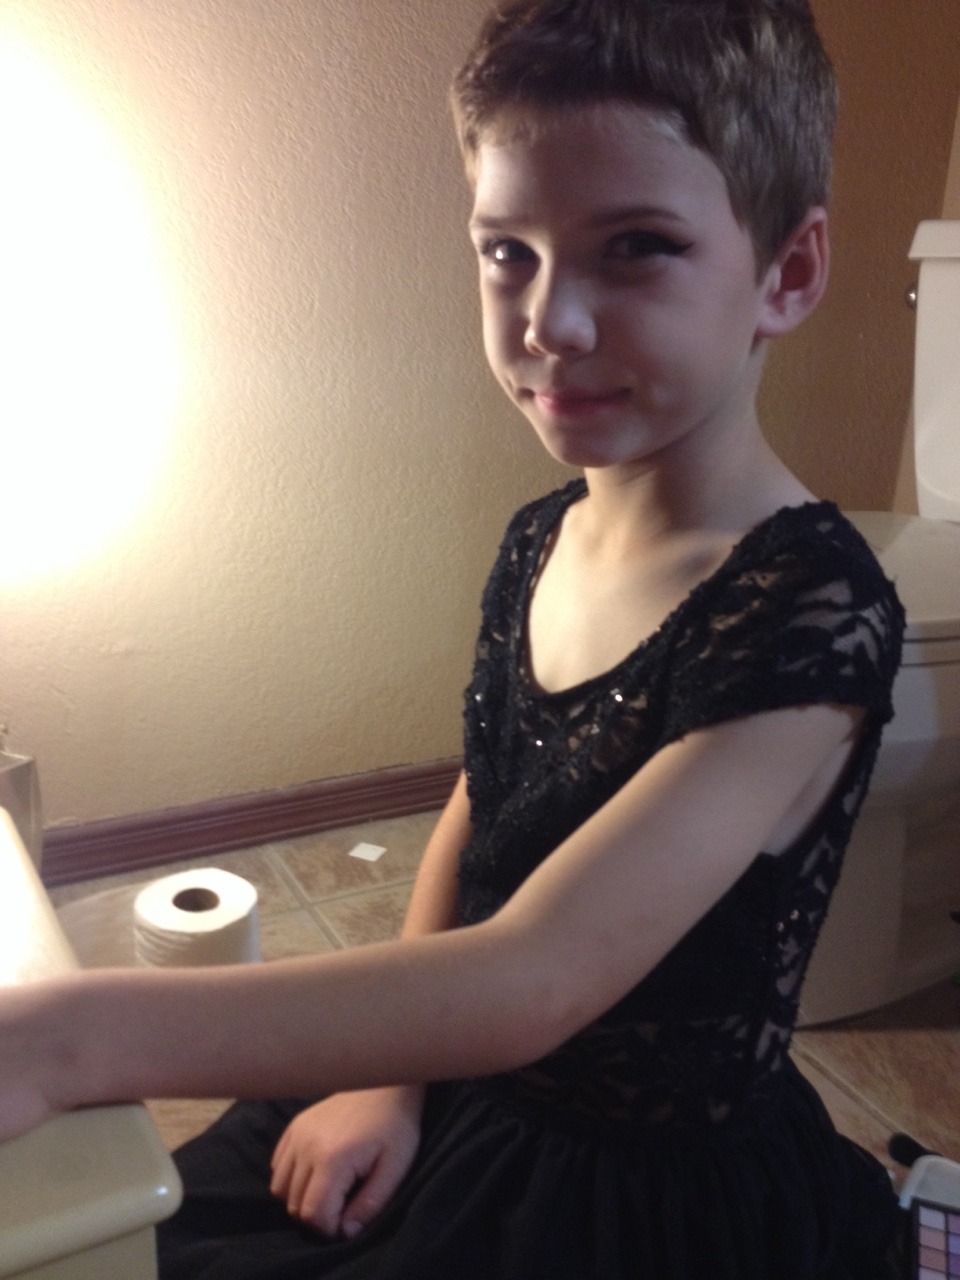 yowgert:  Meet my little brother Jamie, he’s 8 years old and loves to wear dresses.